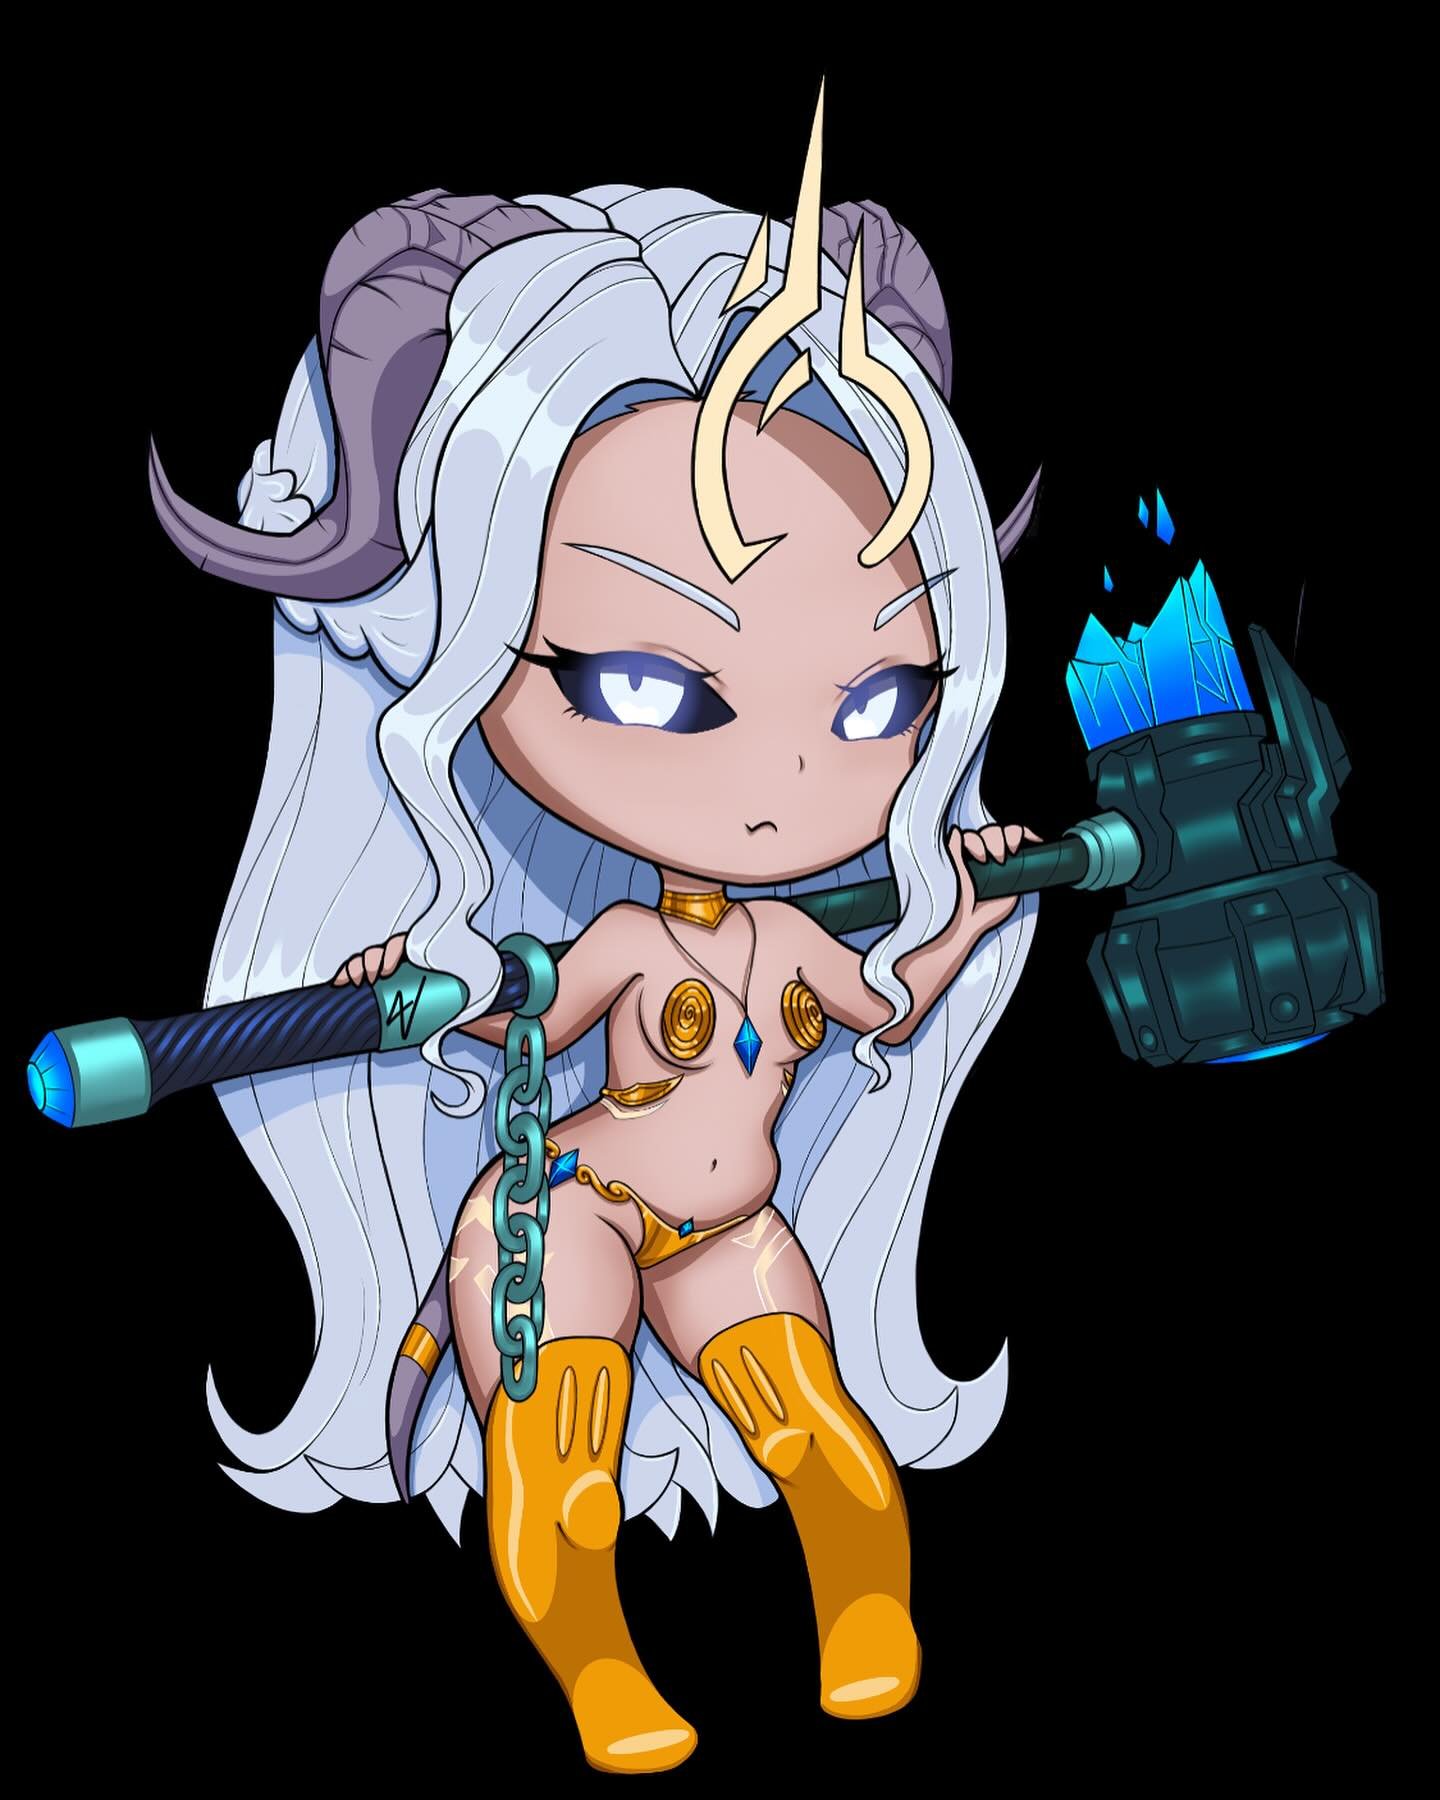 Finished my little Chibi Vel for my Twitch page. She embodies my Draenei healer who isn&rsquo;t afraid to Boop some people back into line. 🤍

I&rsquo;ve struggled really hard with &ldquo;cute&rdquo; art for as long as I can remember. It&rsquo;s been